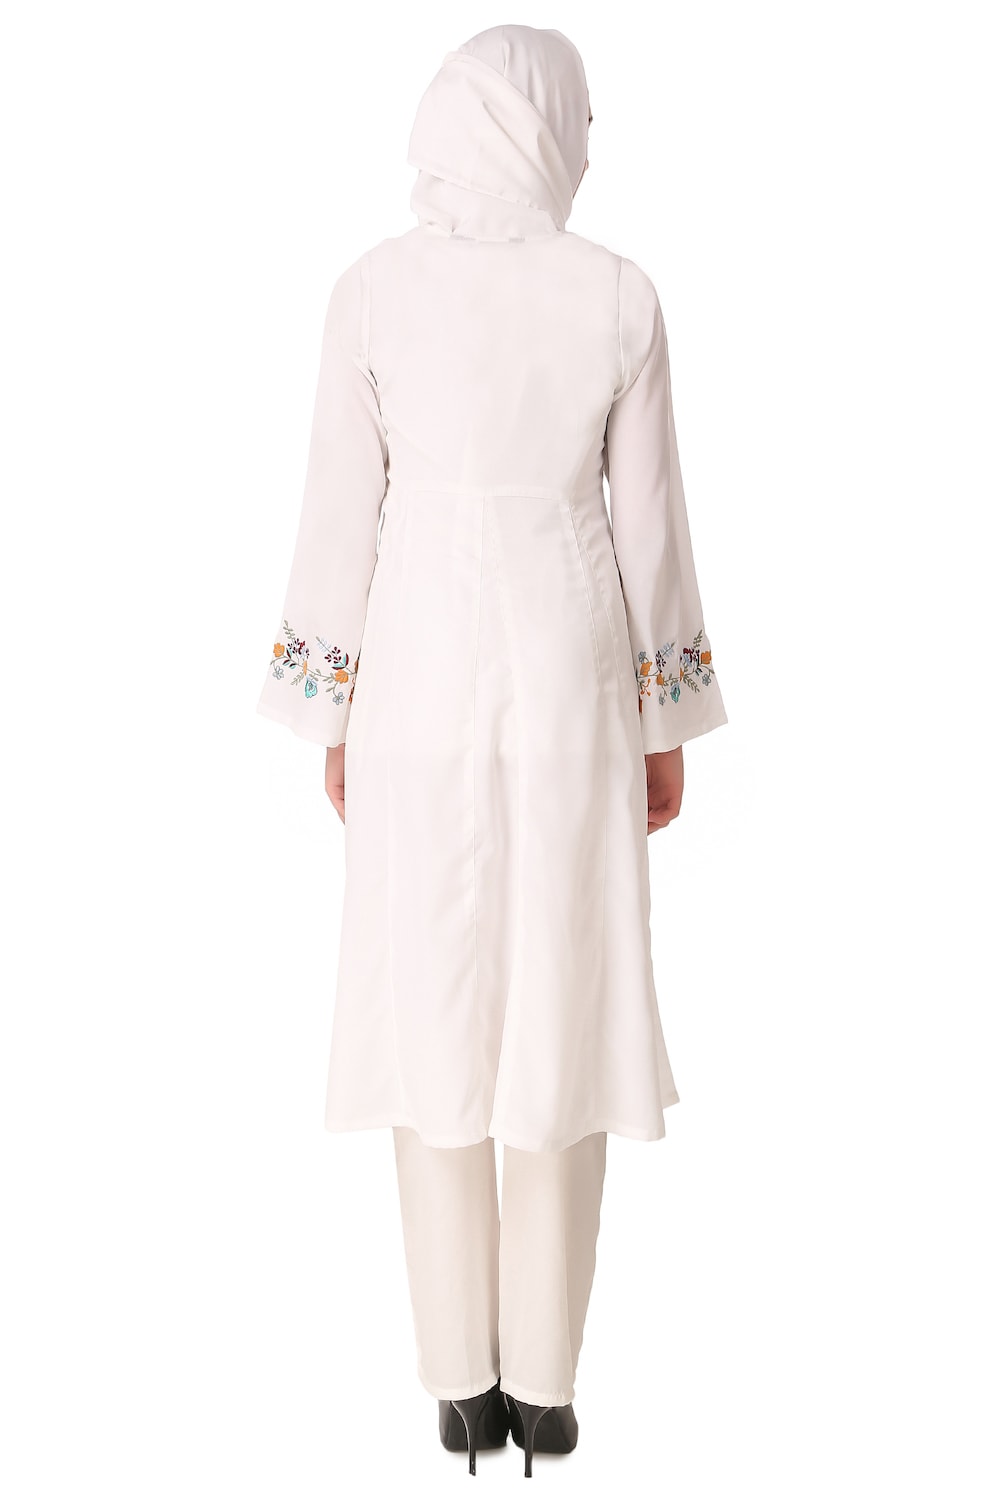 Colorful Embroidered Bell Sleeve White Salwar Kameez